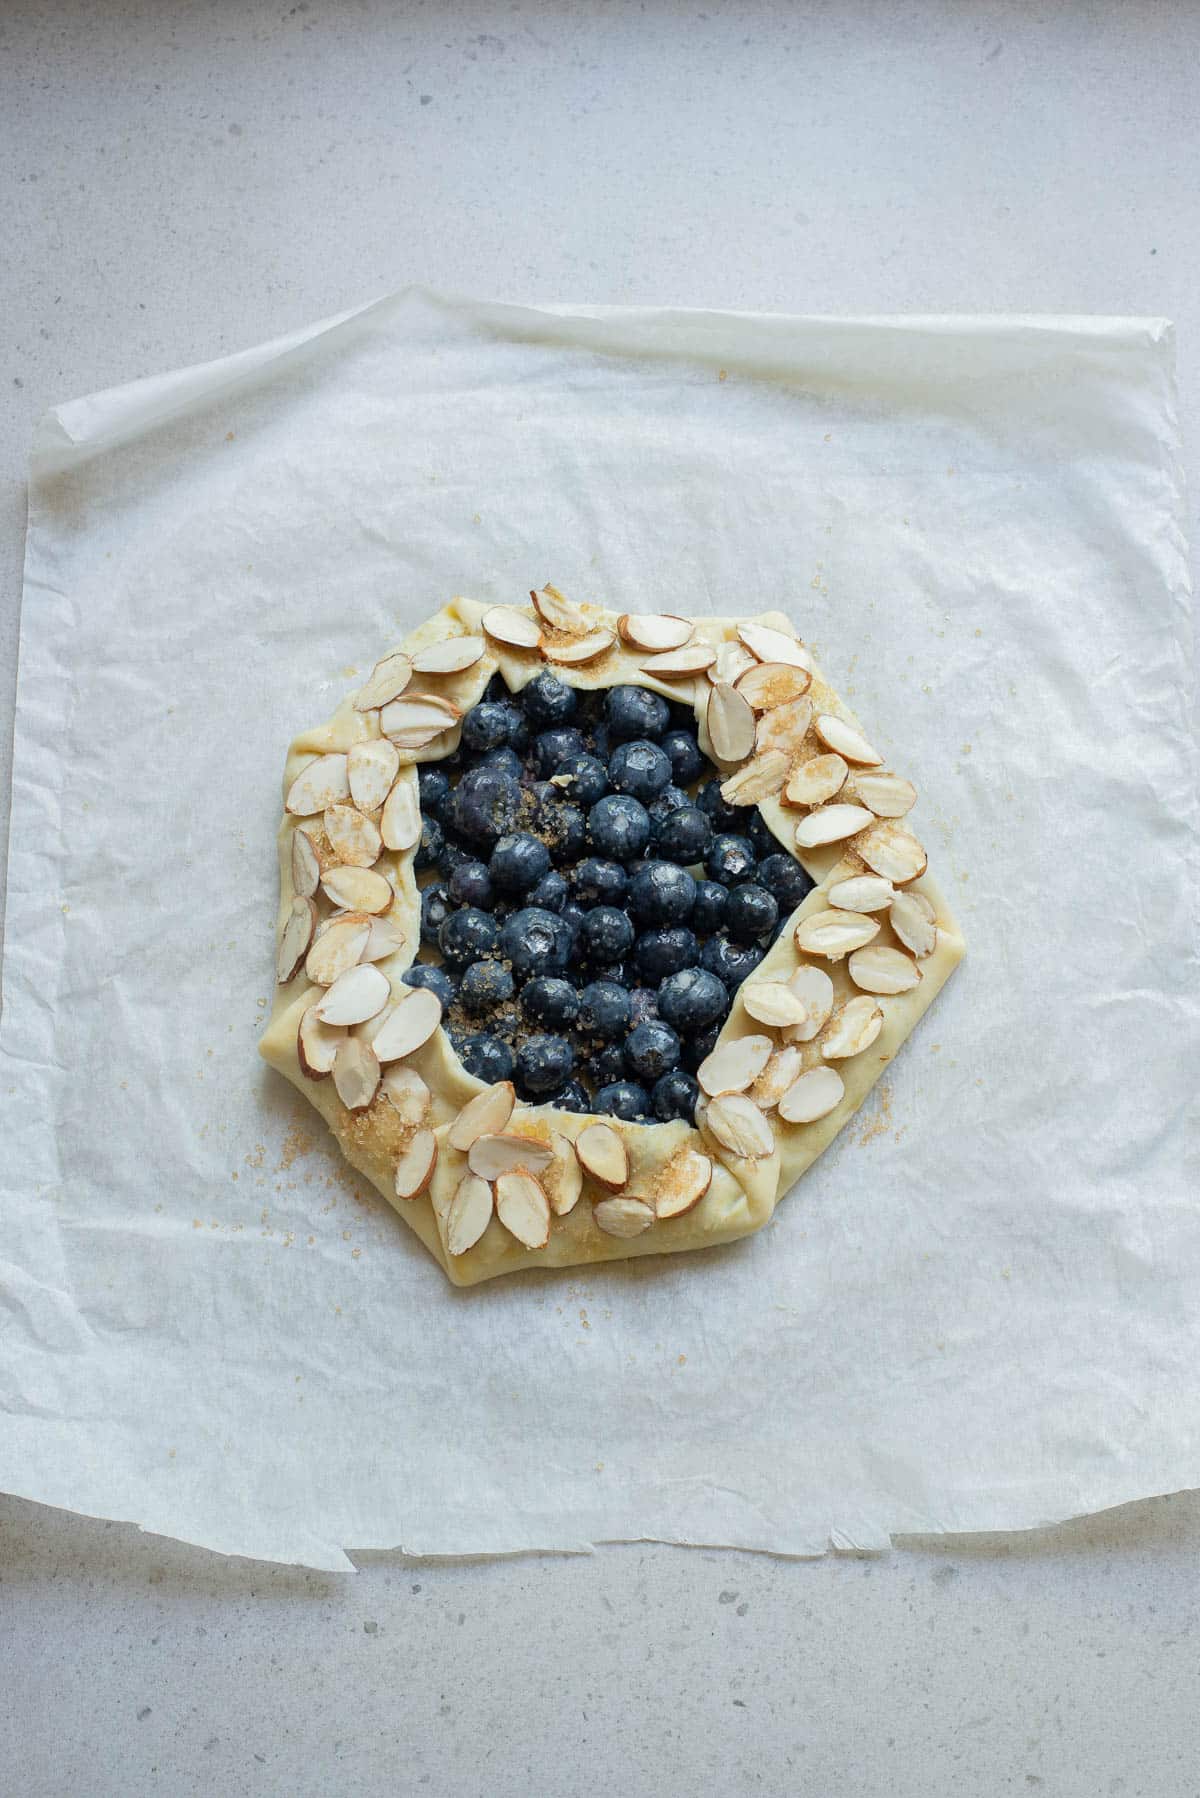 Blueberries in a pie crust on parchment paper sprinkled with almonds.